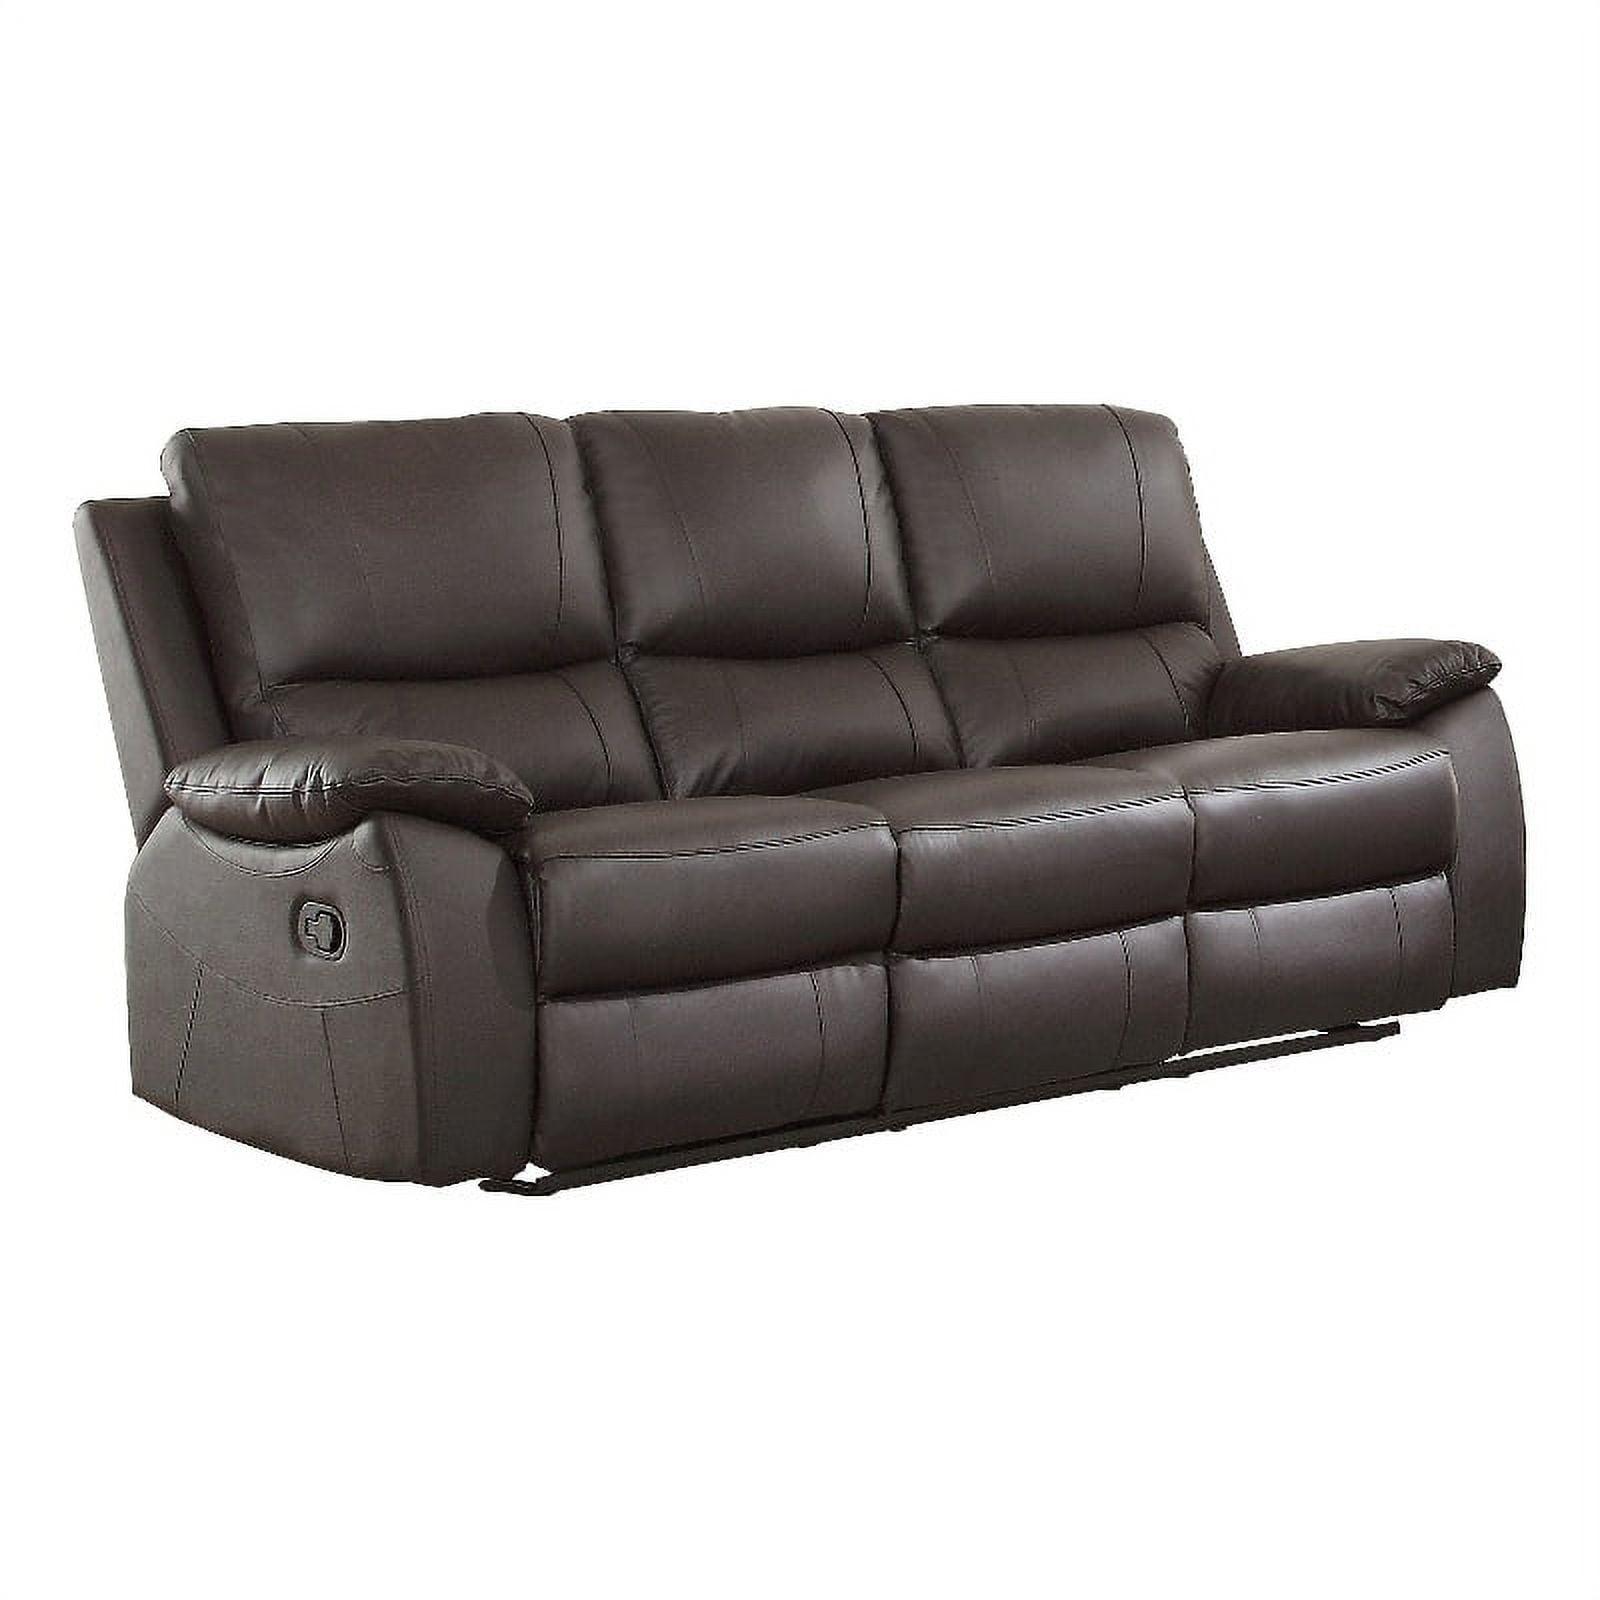 Dawson 78" Brown Faux Leather Reclining Sofa with Pillow-top Arms